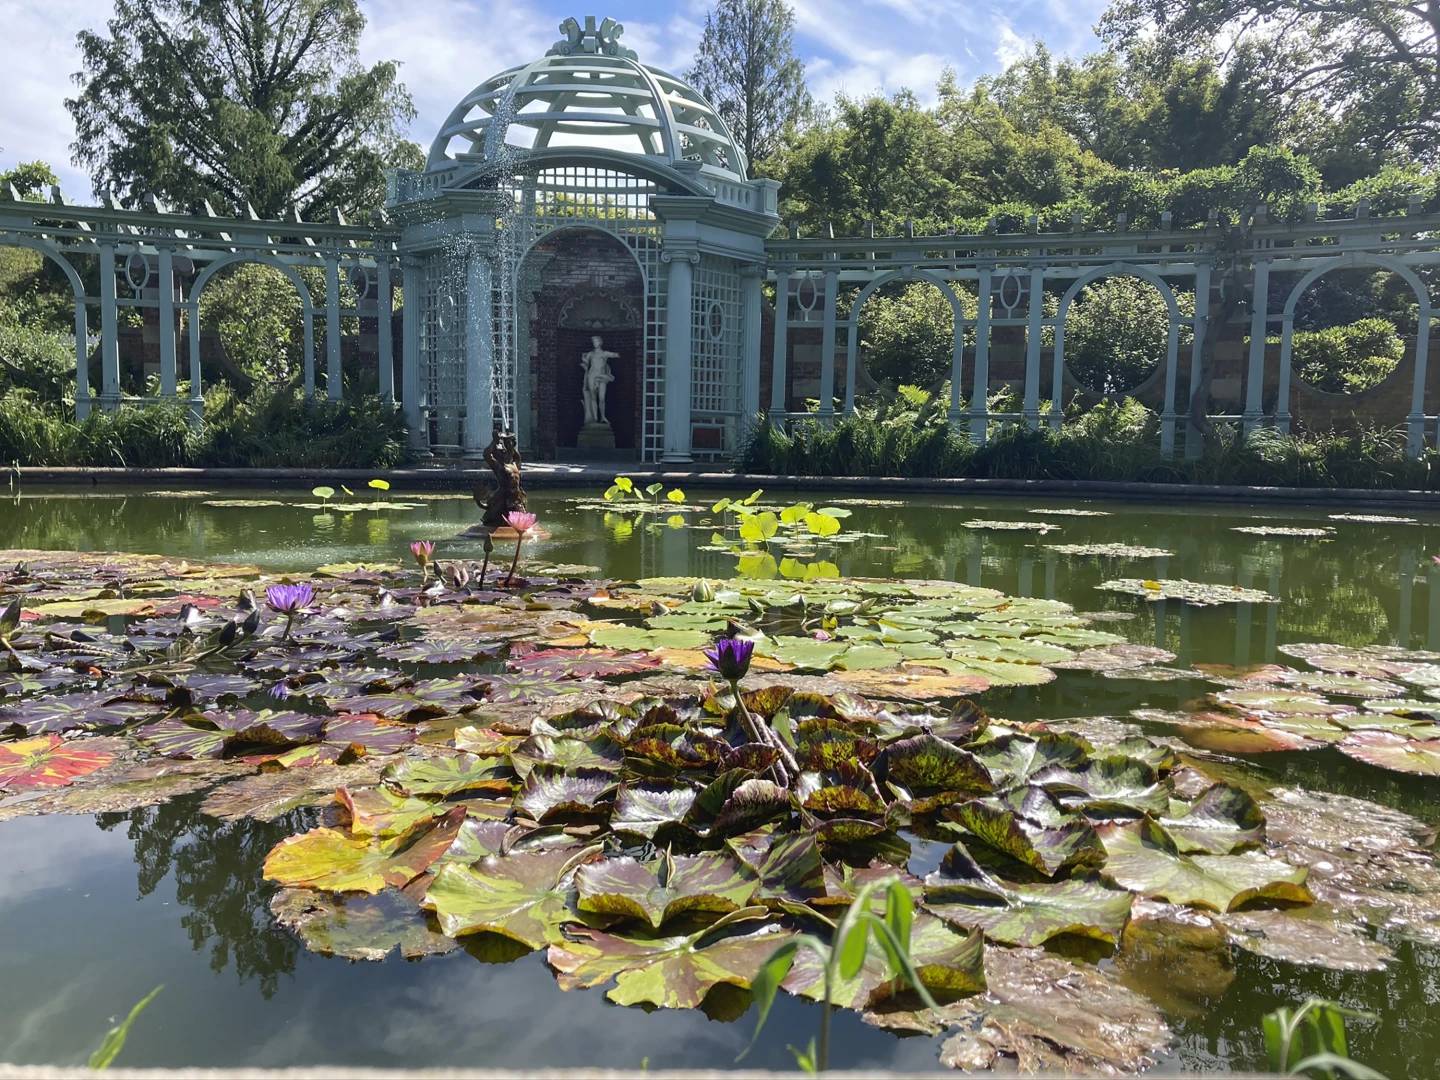 This image provided by Justine Damiano shows the lily pond at Old Westbury Gardens in Old Westbury, New York, one of more than 350 public gardens and arboretums whose admission is included with a membership in the American Horticultural Society.